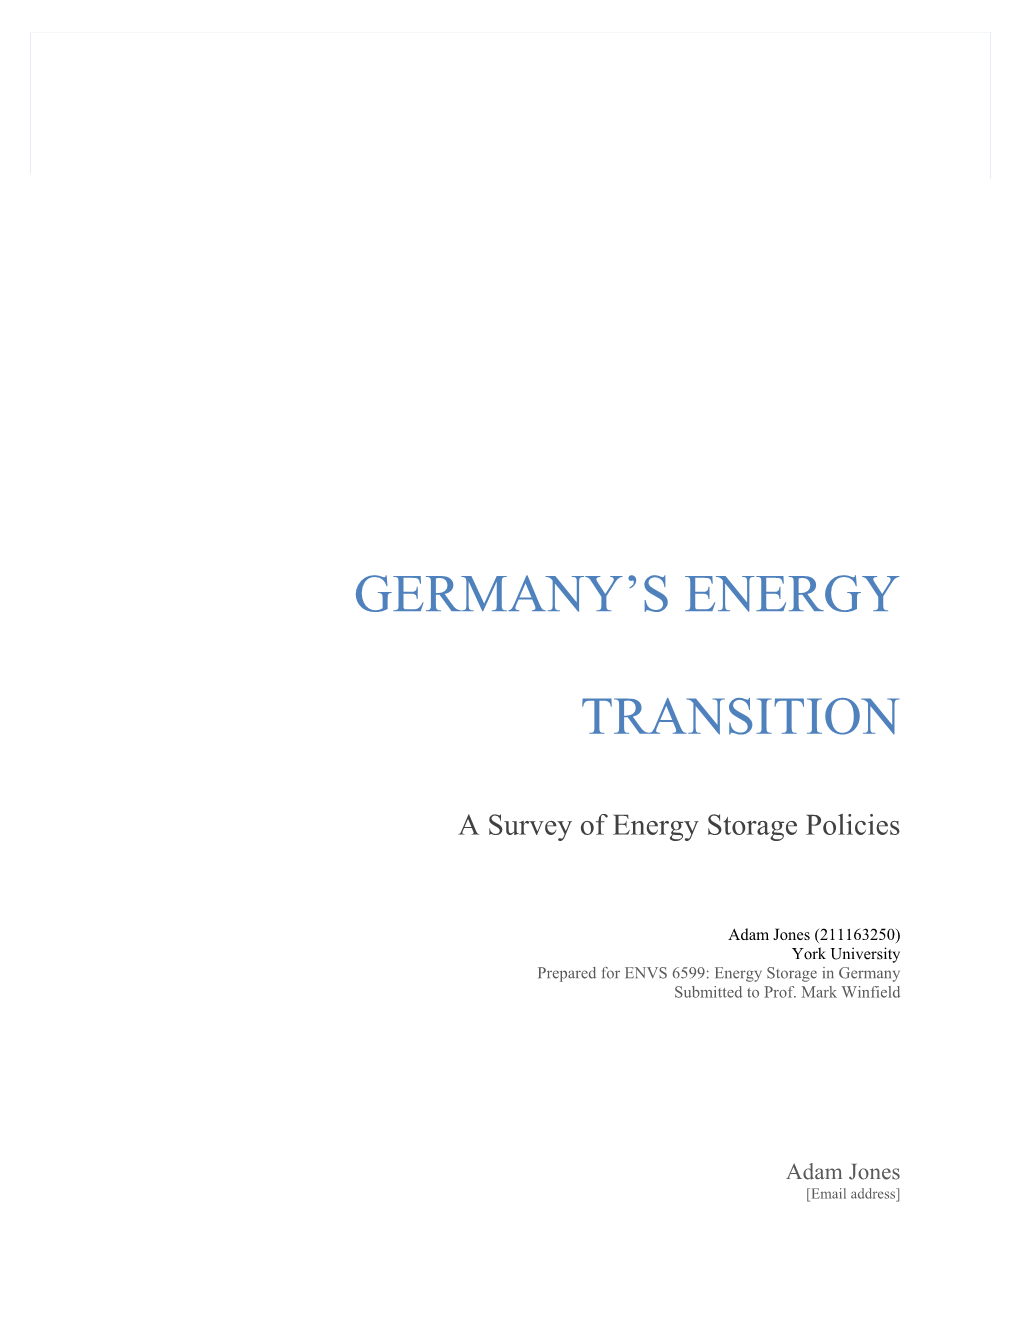 Germany's Energy Transition